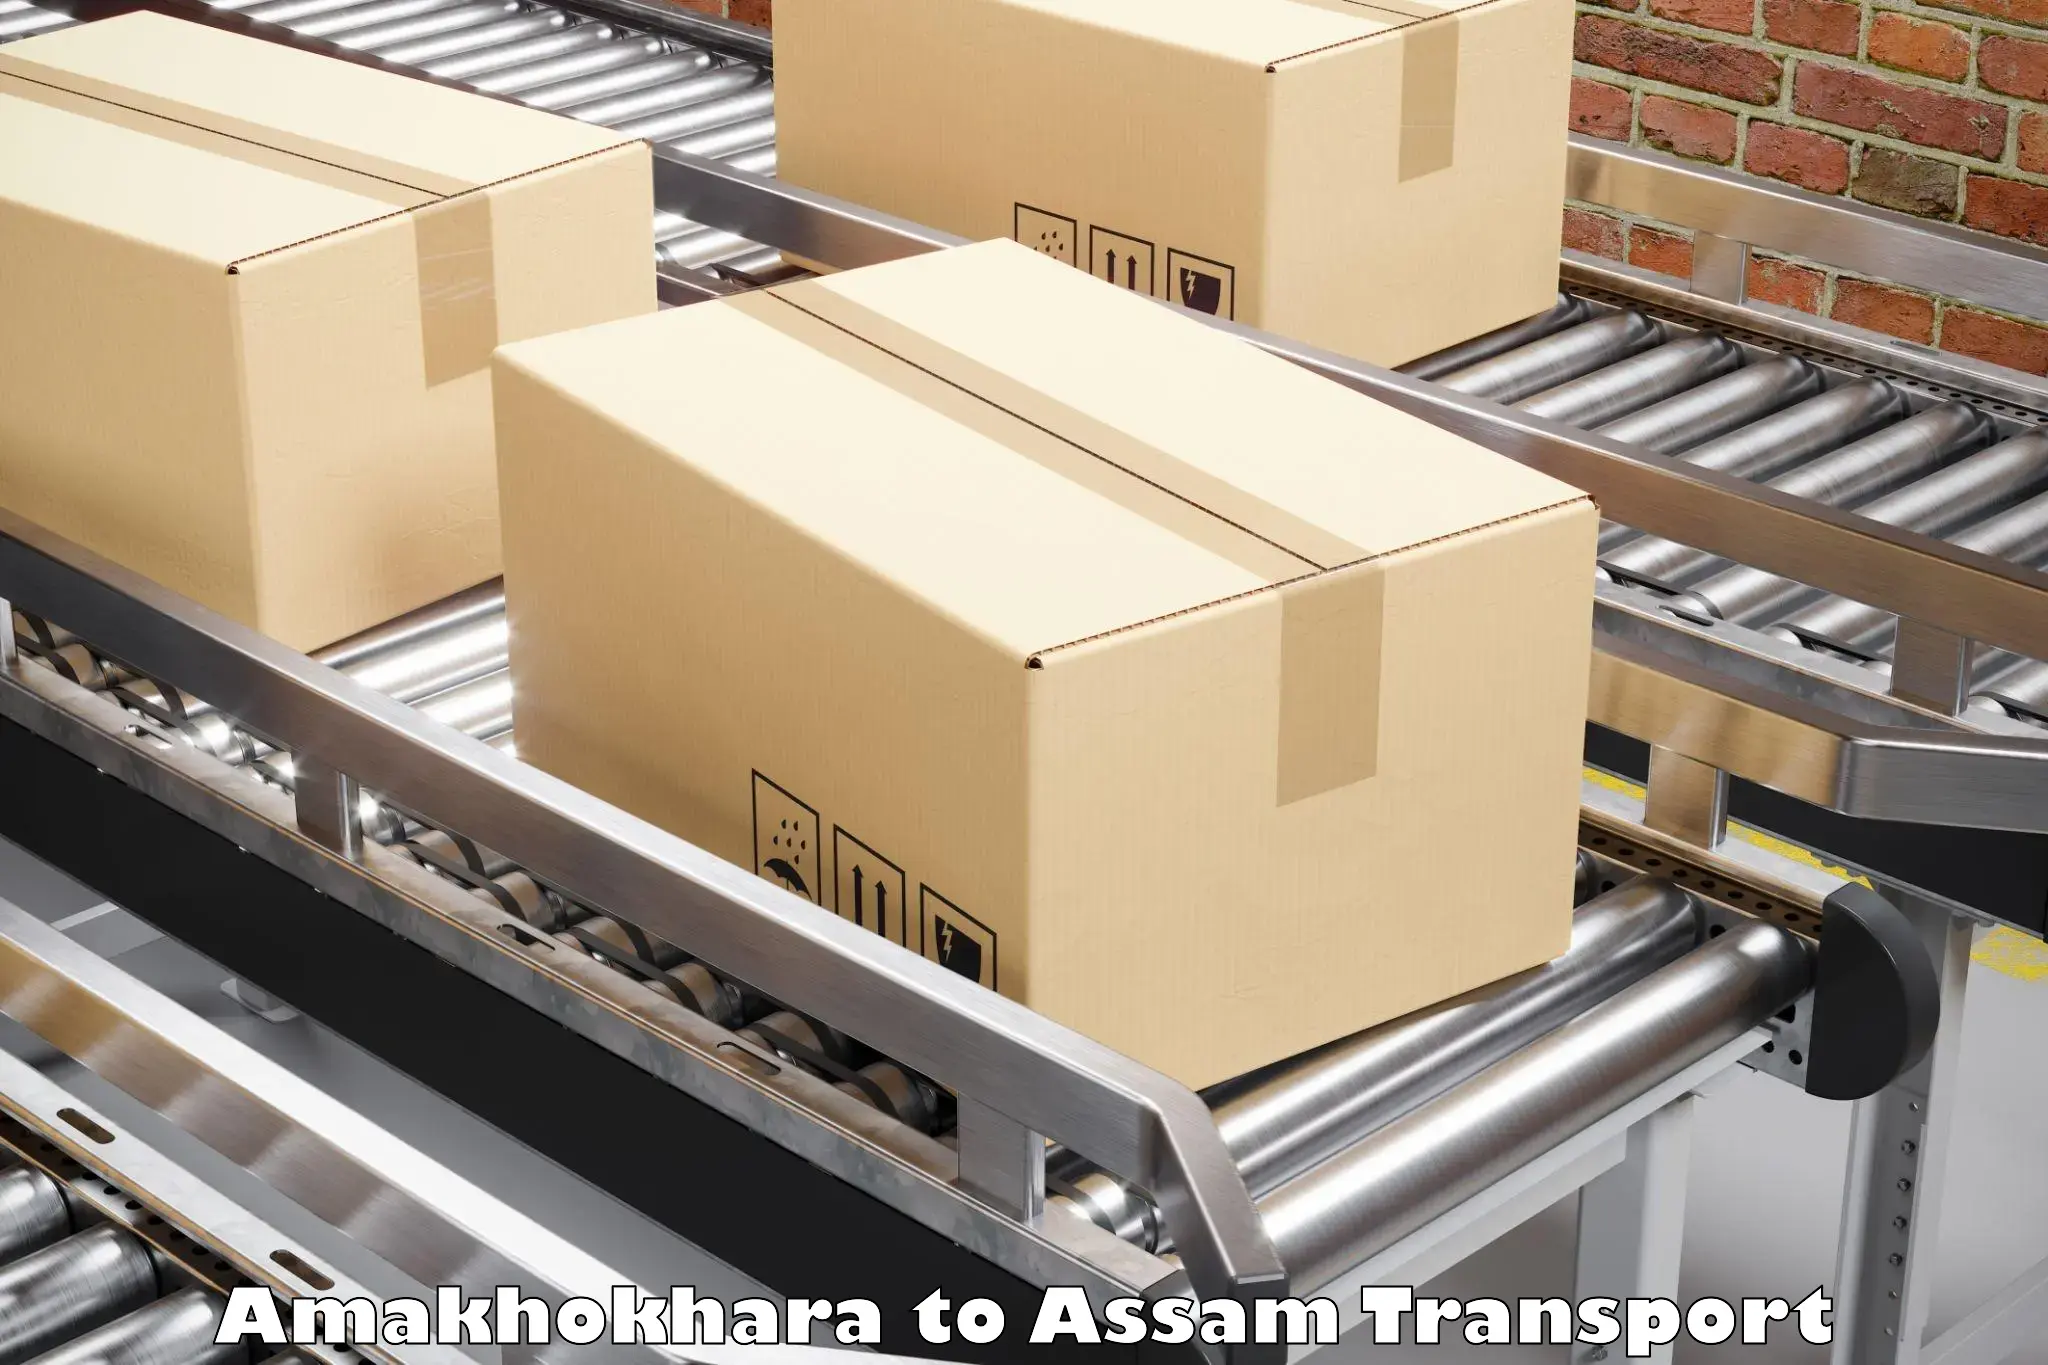 Package delivery services Amakhokhara to Rupai Siding